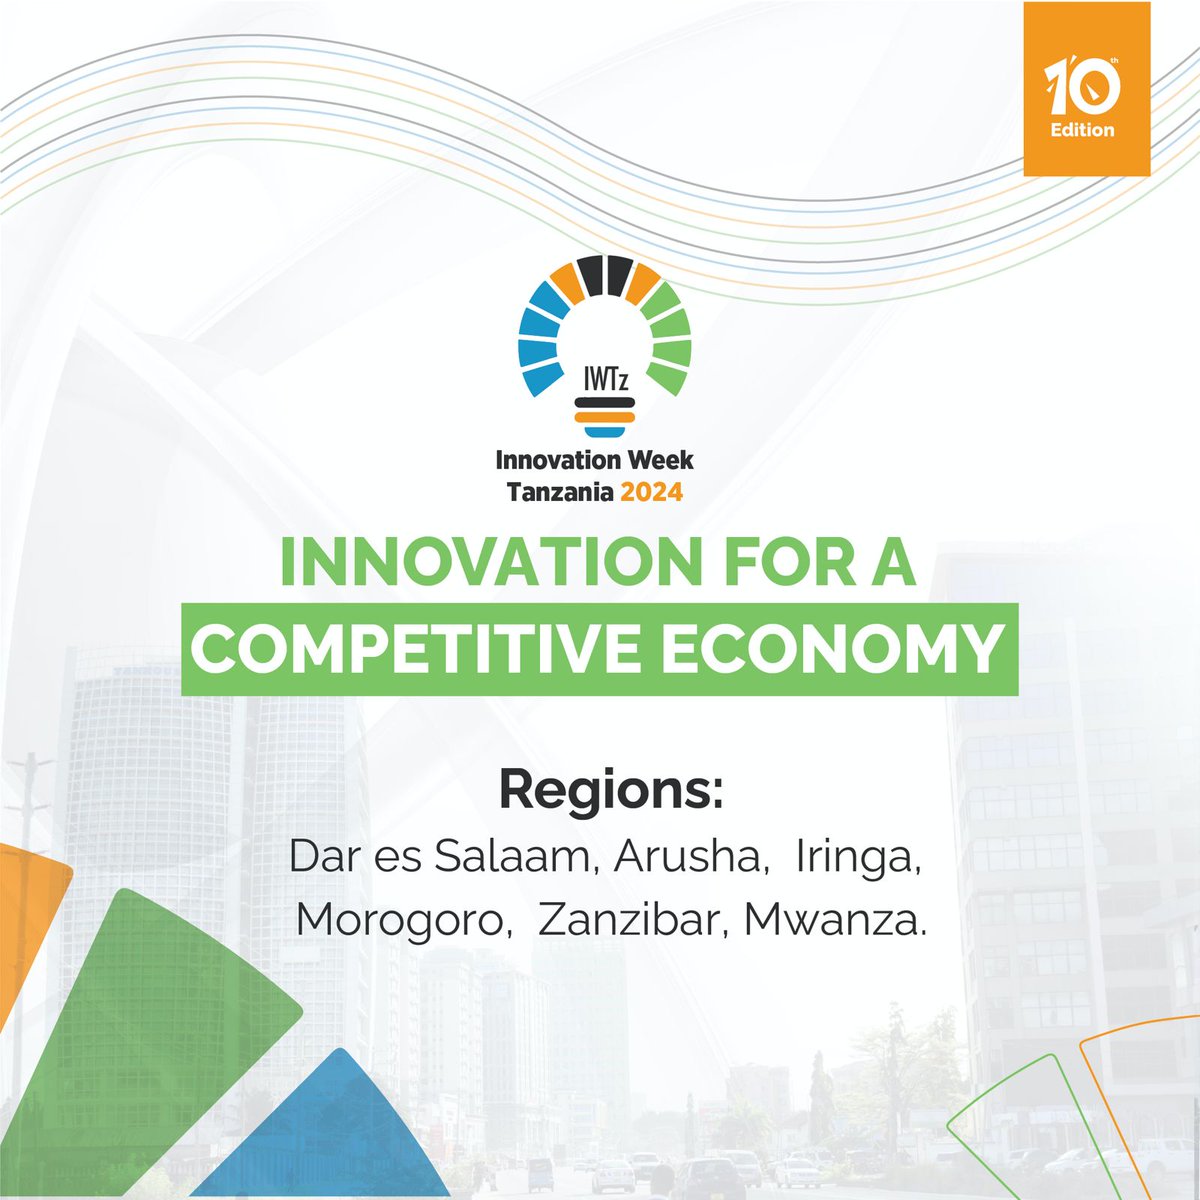 Get ready for Innovation Week Tanzania 2024, coming soon to a region near you! Join us in Dar es Salaam, Arusha, Iringa, Morogoro, Zanzibar, and Mwanza for engaging panel discussions, policy dialogues, workshops, conferences, pitch competitions, & more happening all across TZ!